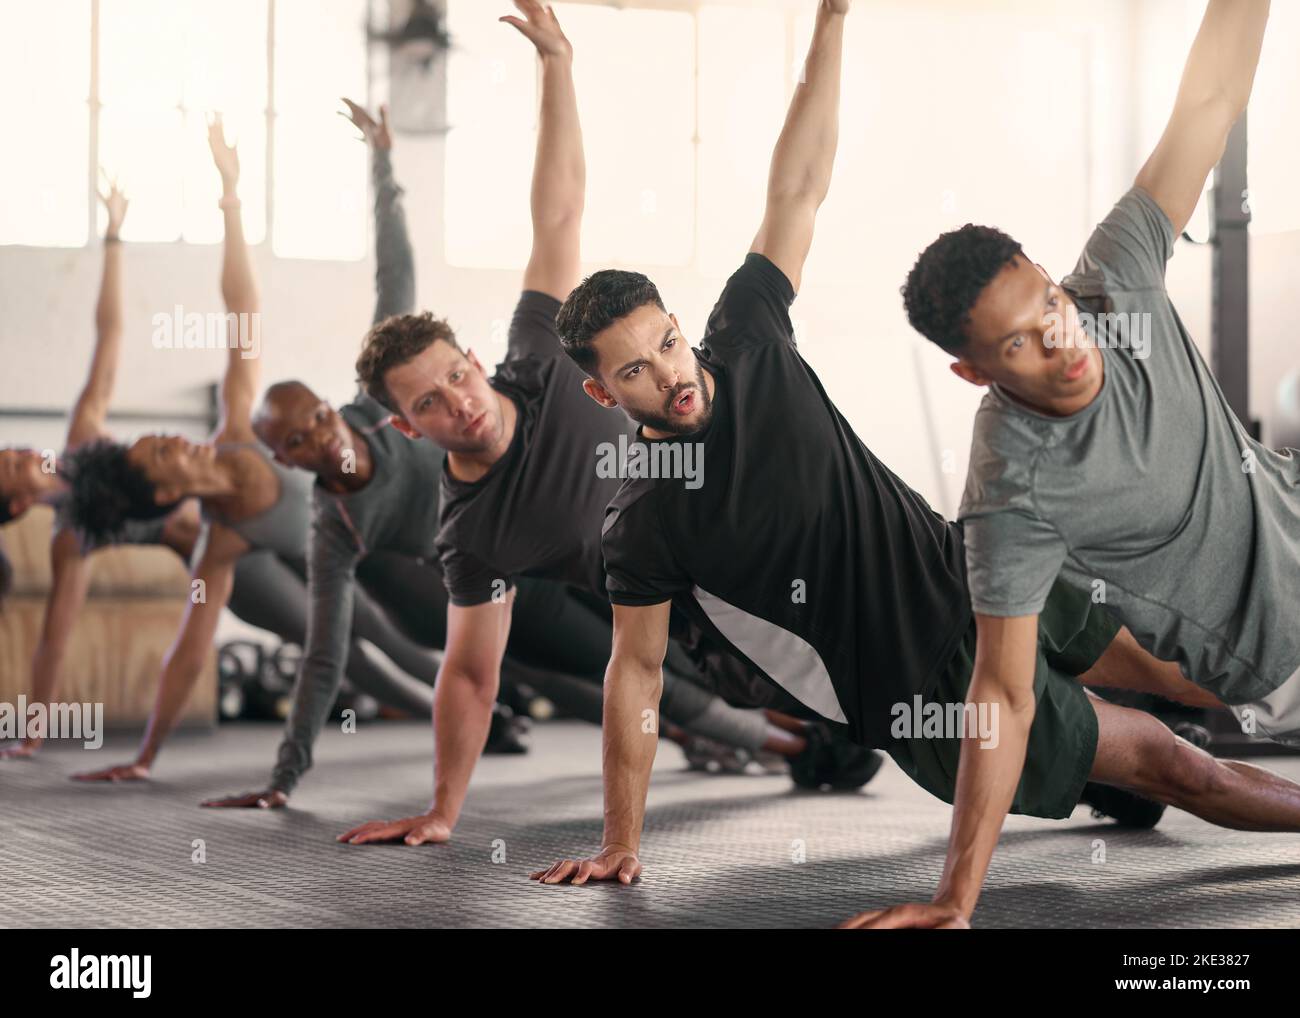 Teamwork, fitness or sport team stretching in gym, studio or arena floor for wellness, exercise or sports workout. Diversity, health or athlete group Stock Photo